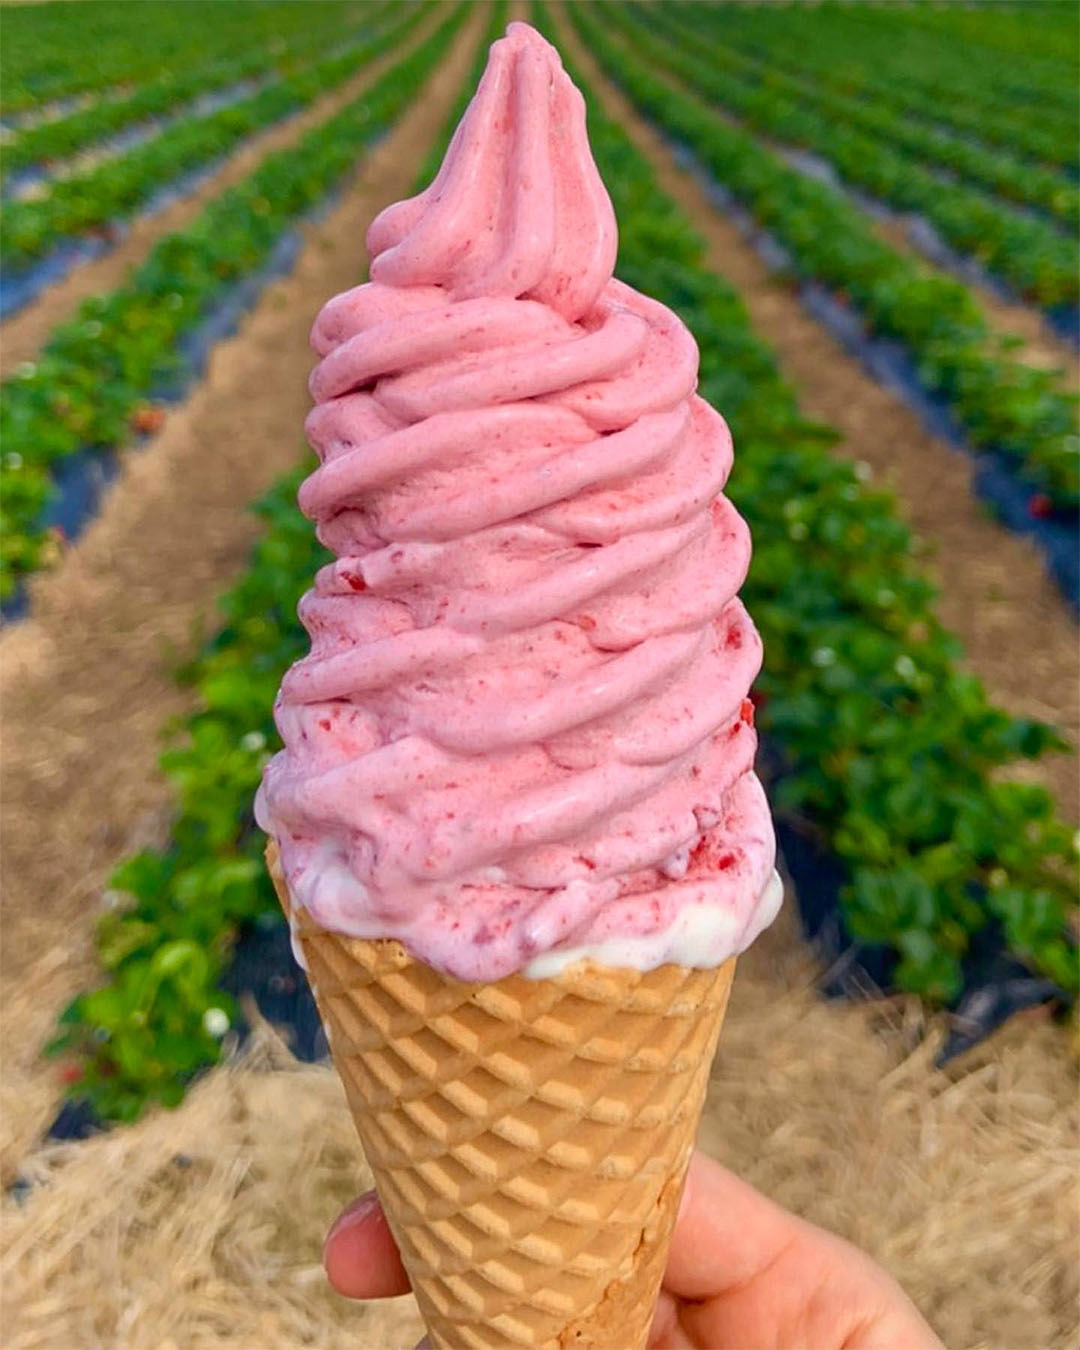 A hand holds up a strawberry ice cream at Clevedon Strawberries, one of the best strawberry-picking farms in Auckland.